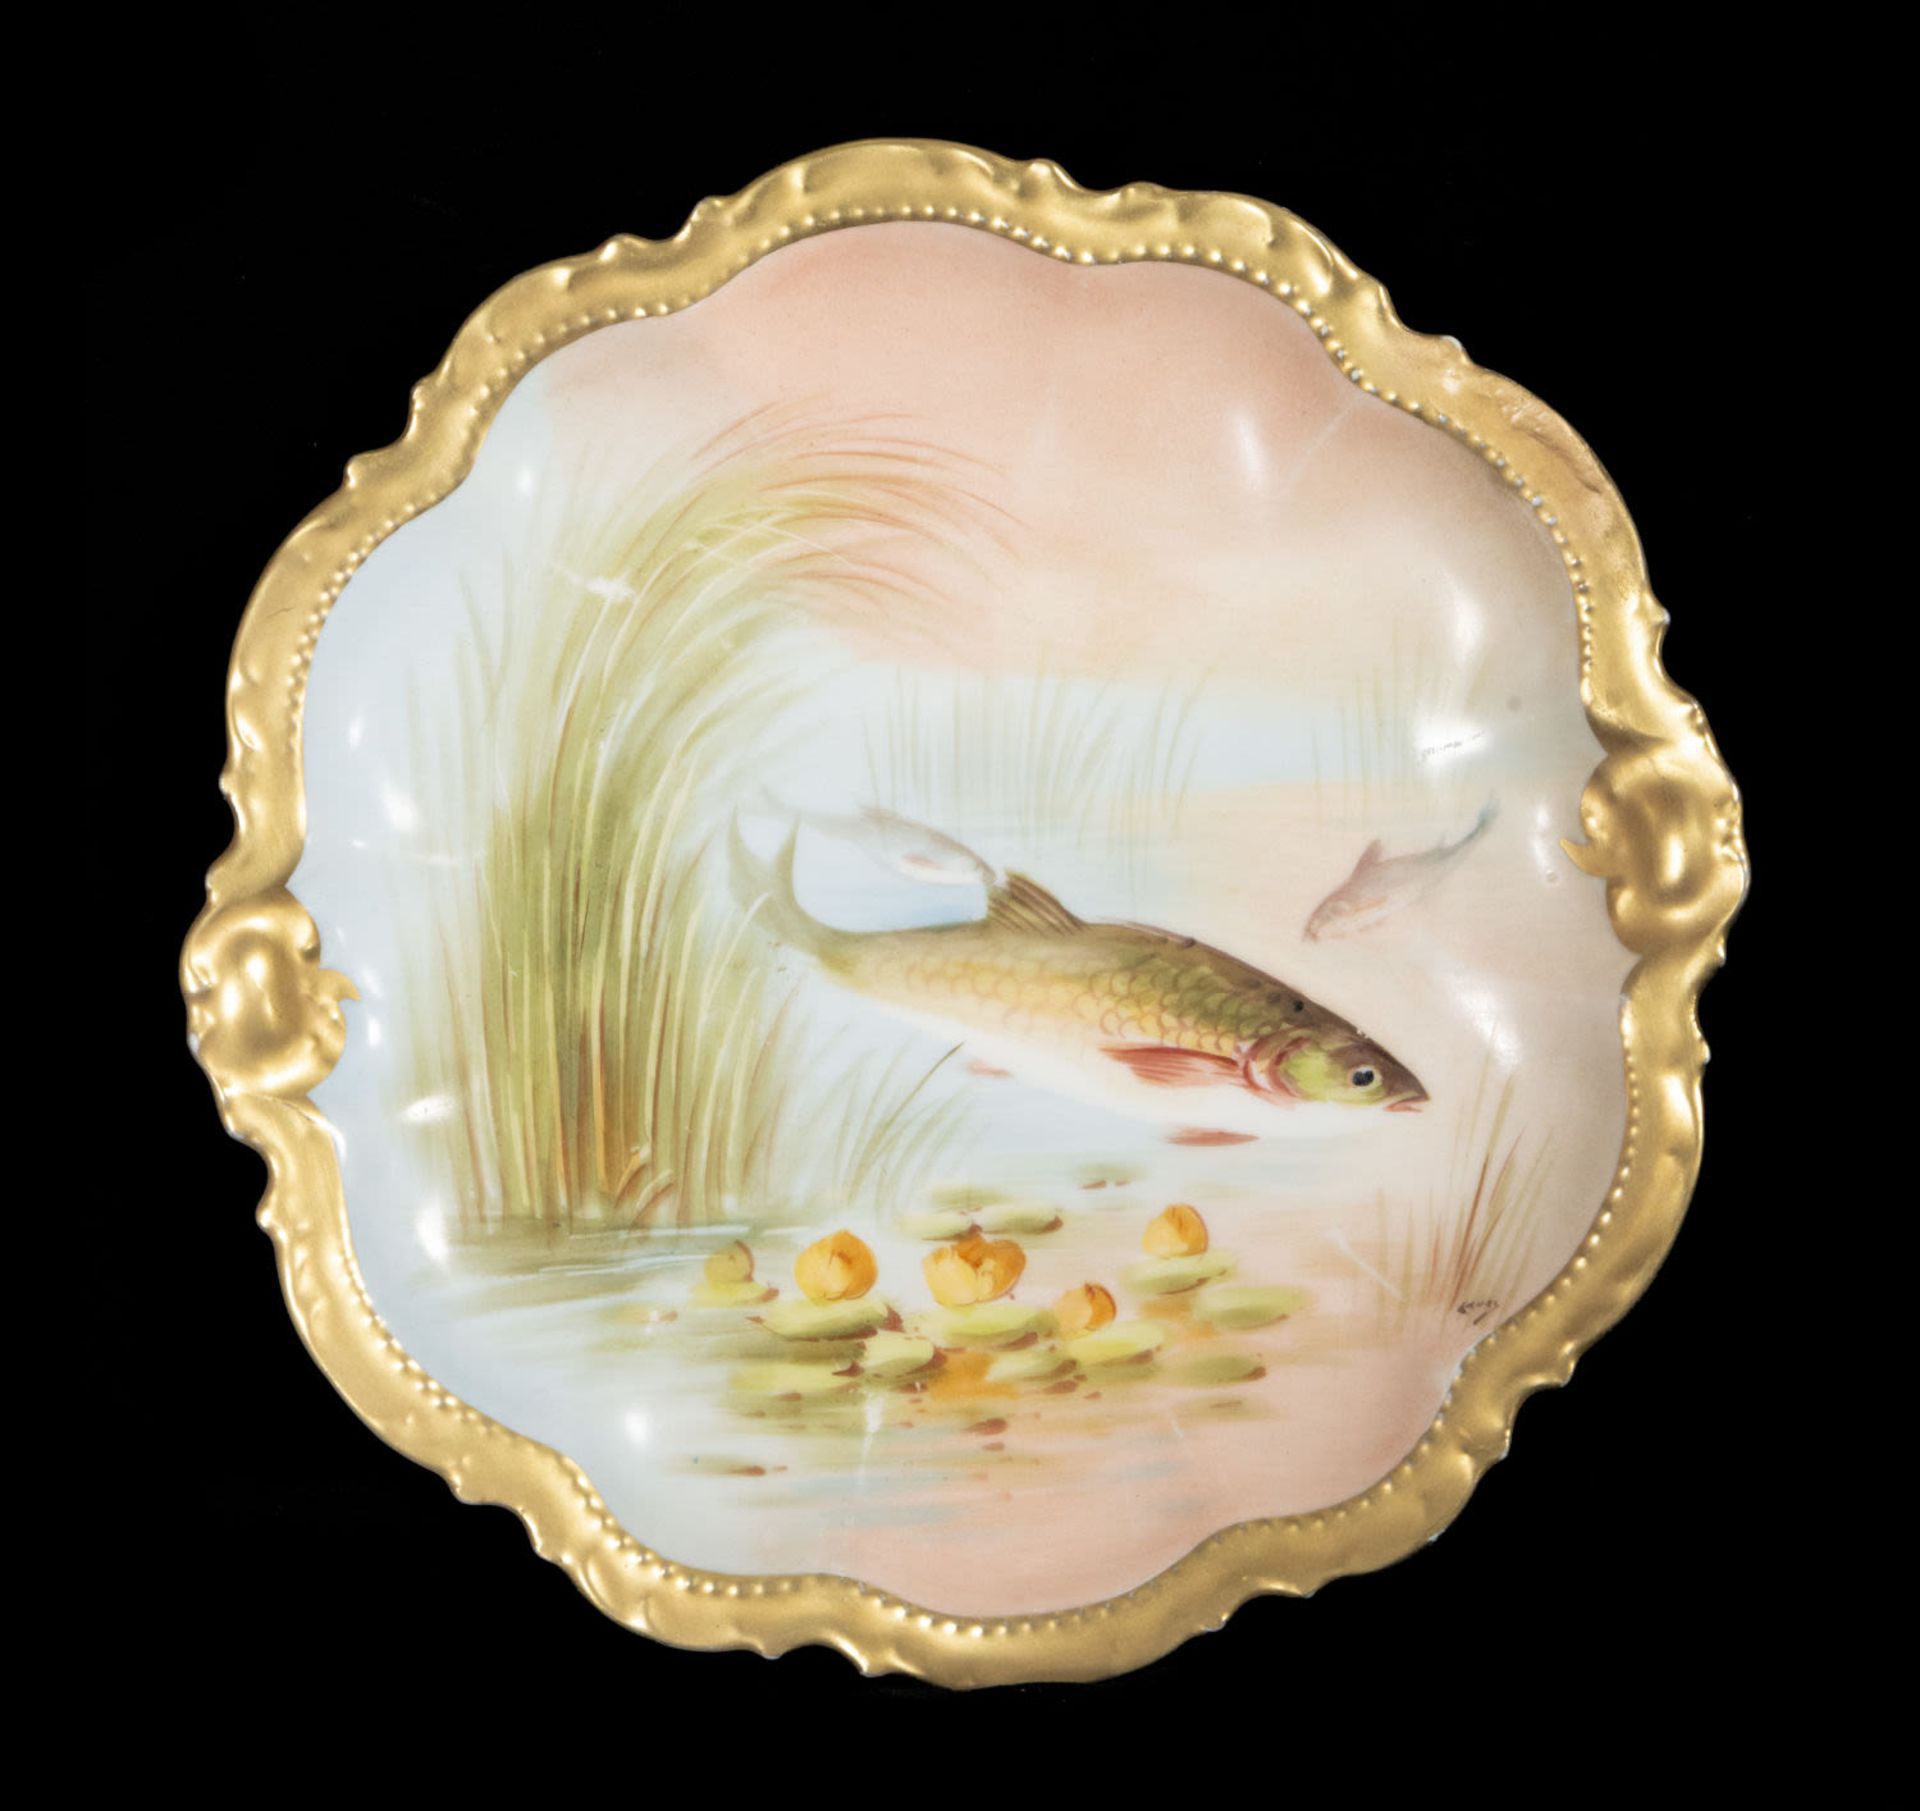 19th Century Limoges Porcelain Fish Dinnerware Set by the Count of Artois, 19th Century - Image 12 of 12